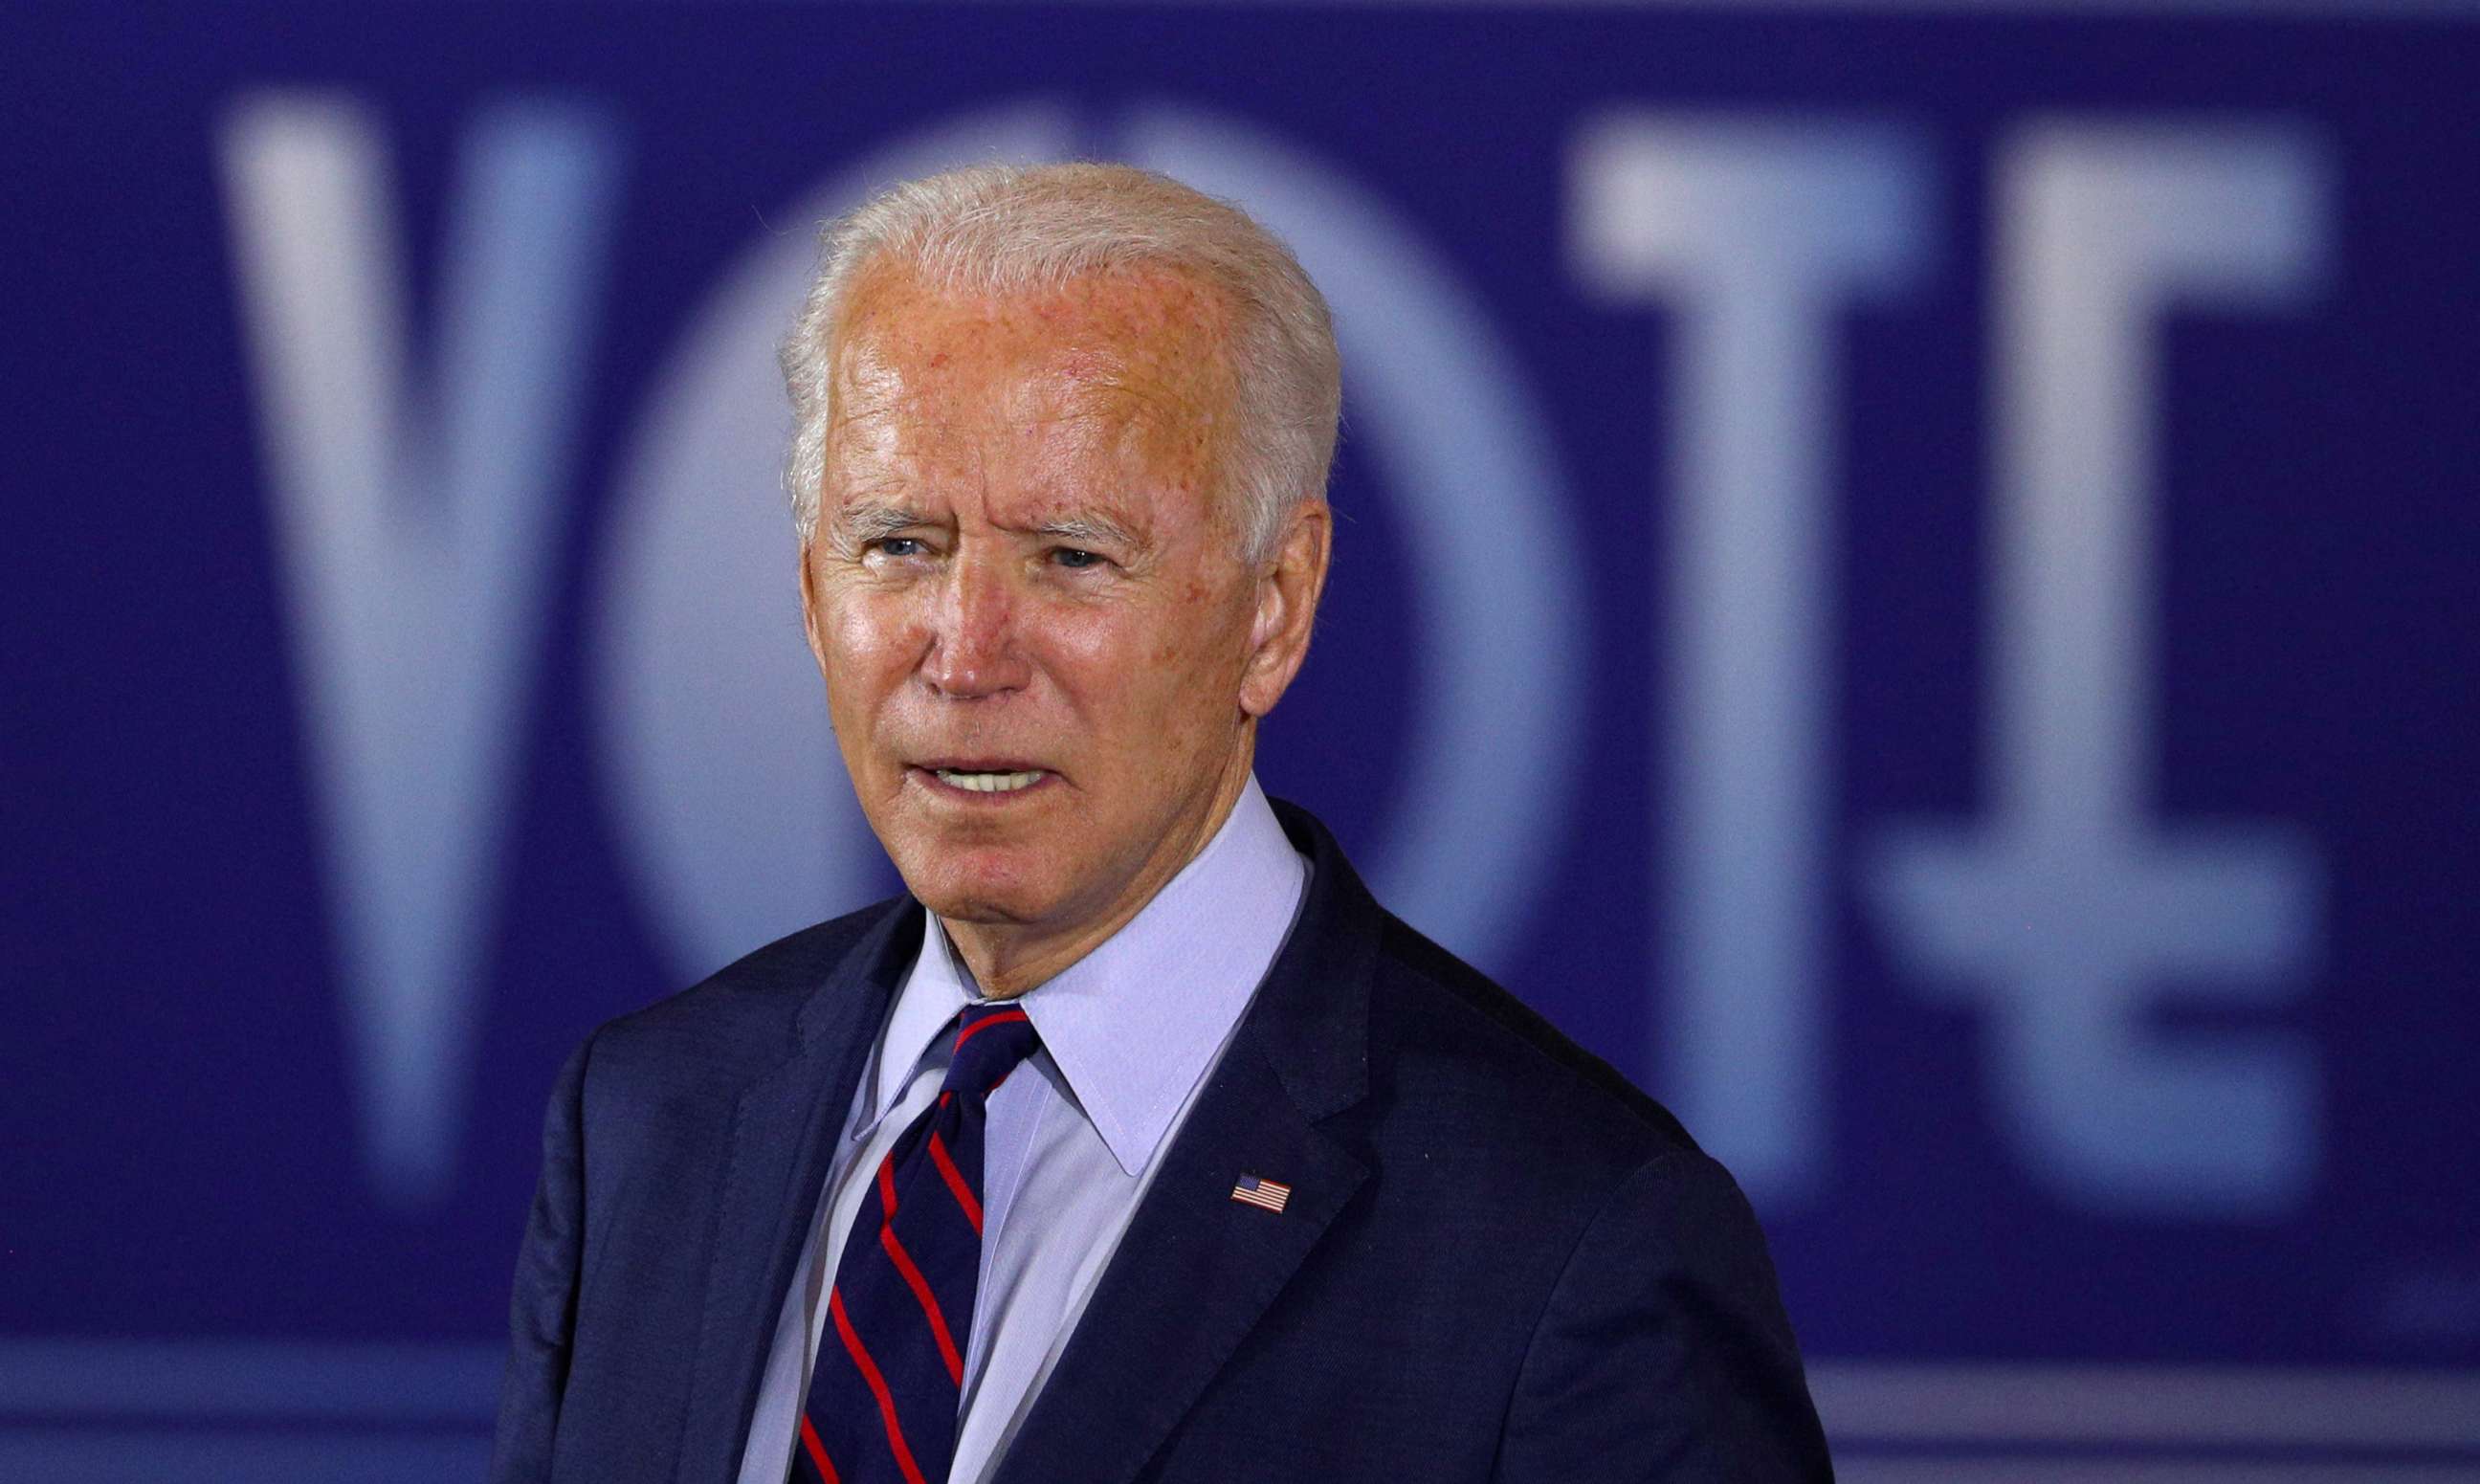 PHOTO: Democratic presidential candidate Joe Biden delivers remarks at a Voter Mobilization Event campaign stop at the Cincinnati Museum Center at Union Terminal in Cincinnati, Ohio, Oct. 12, 2020.